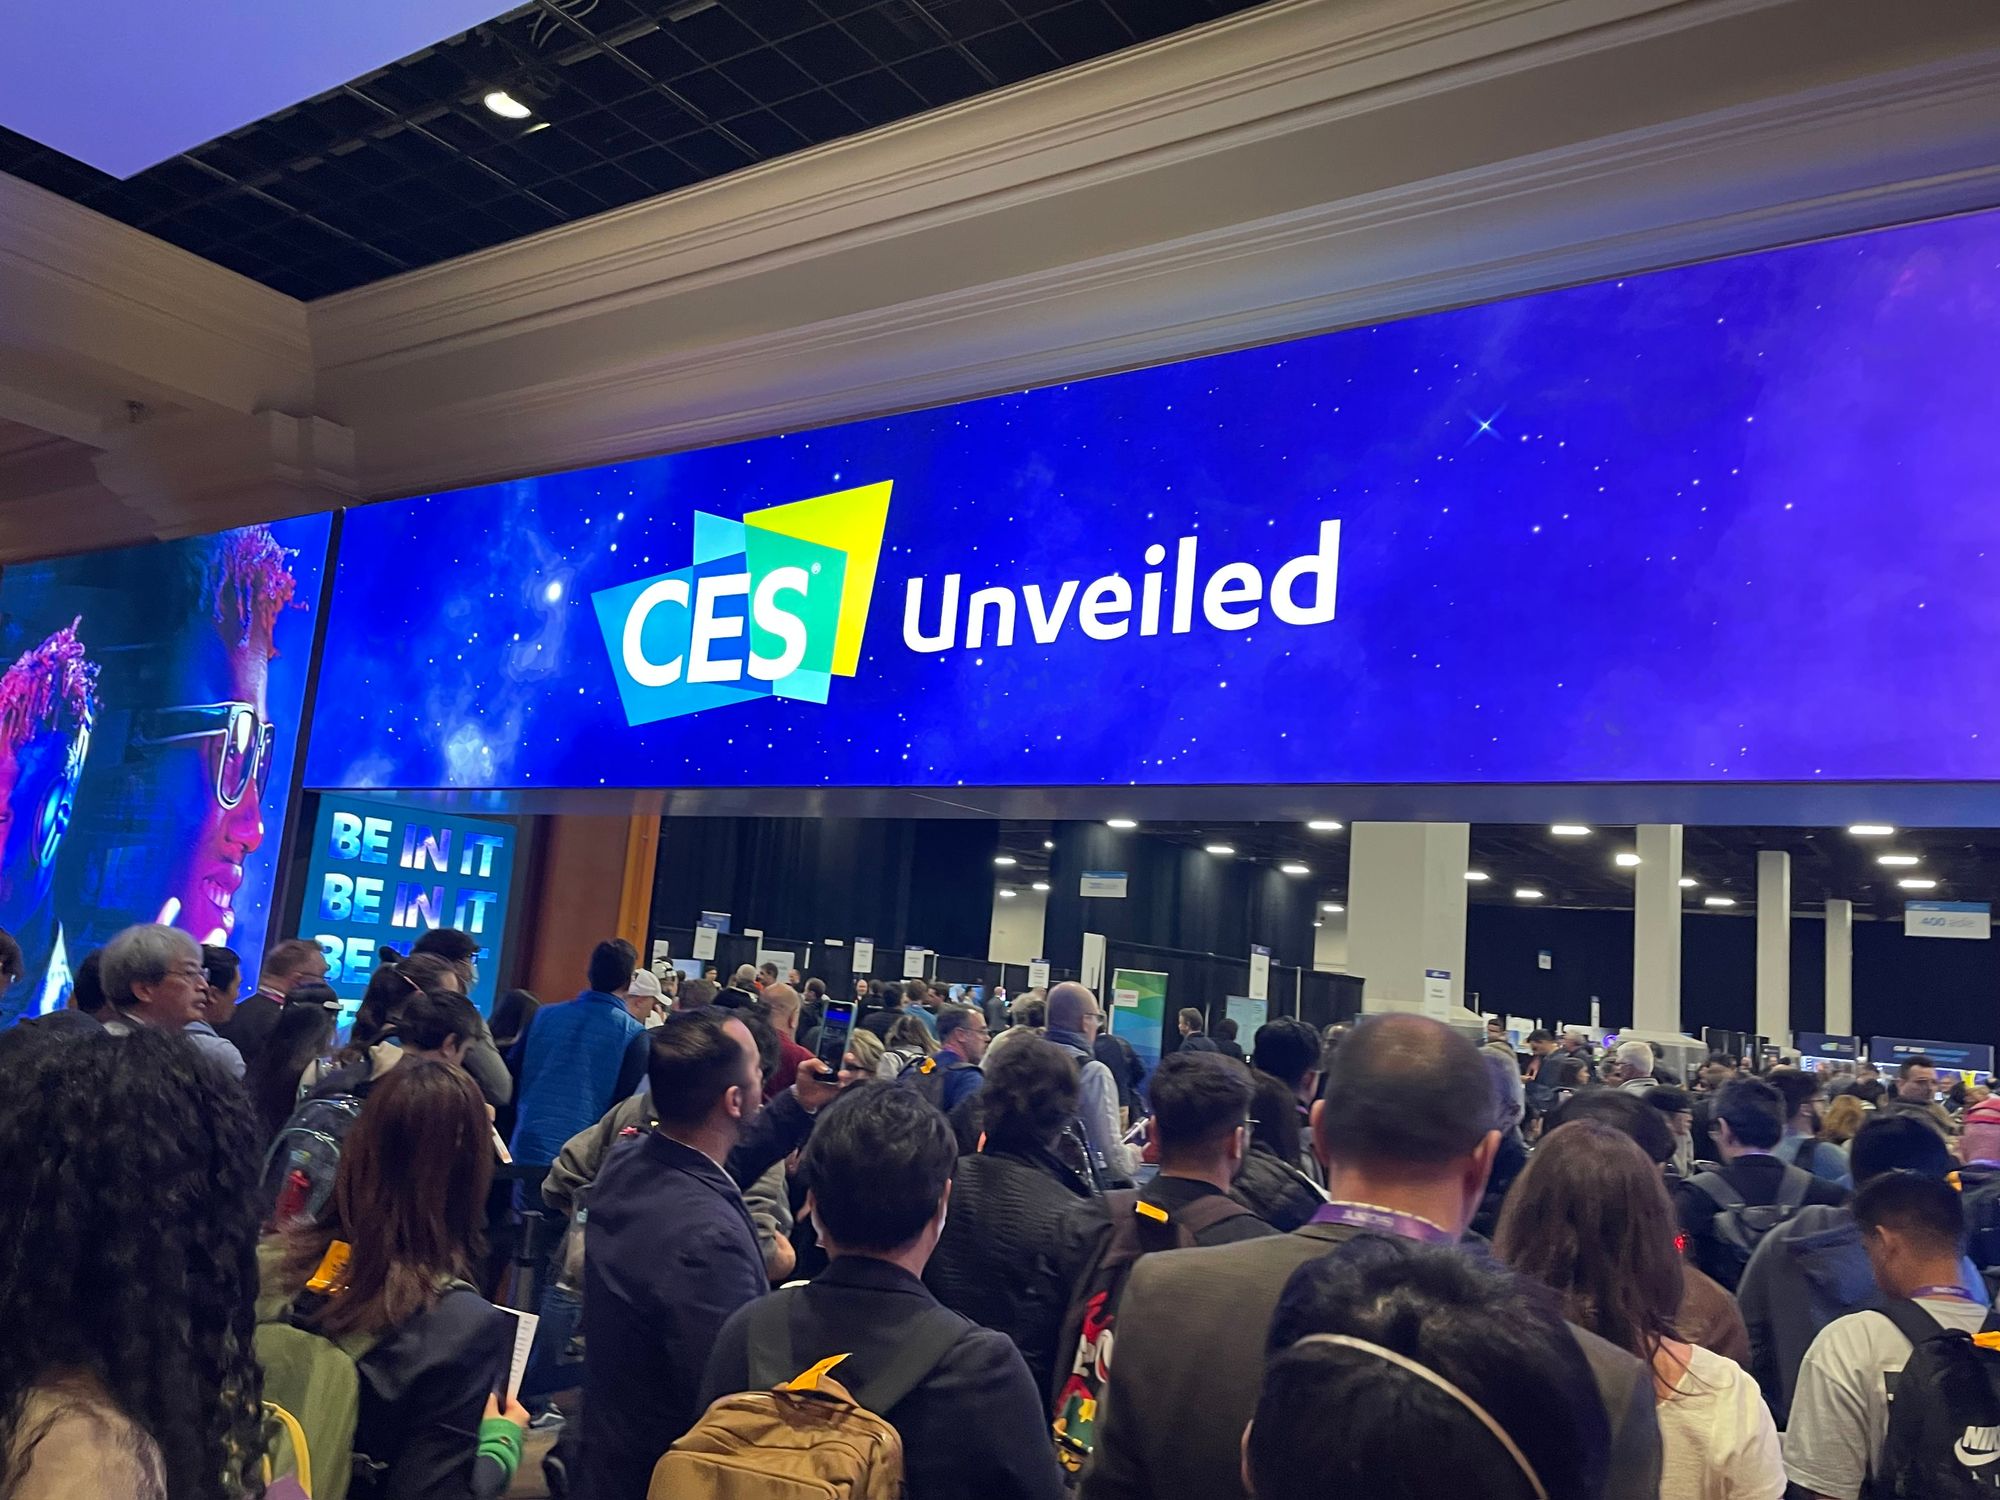 CES 2023: 11 tech trends we spotted at the world's biggest tech